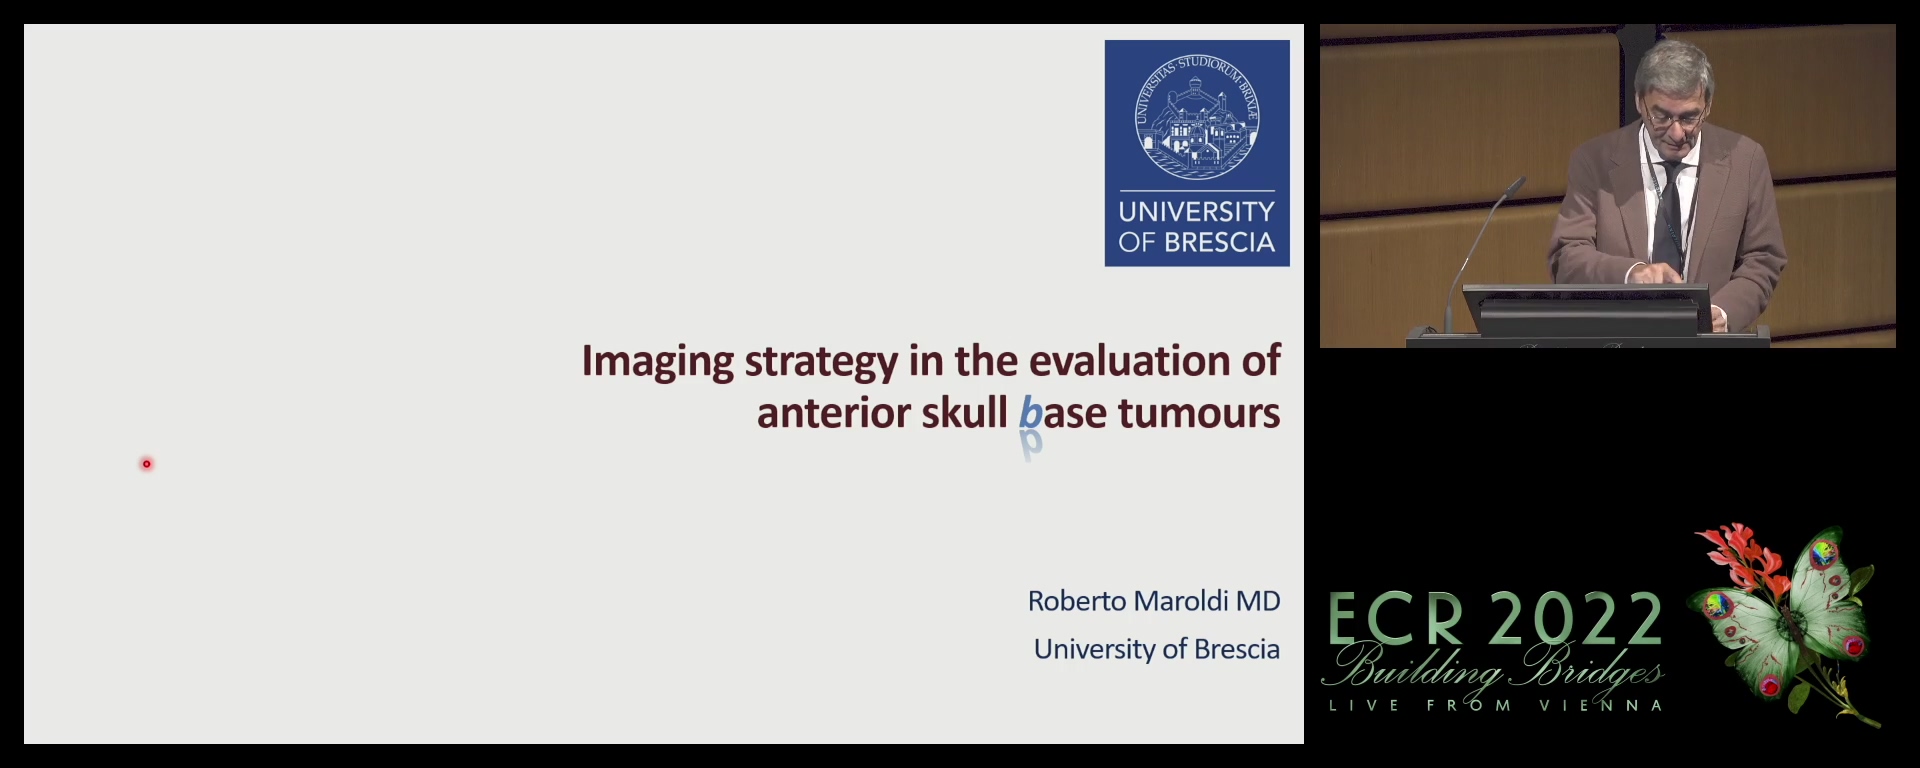 Imaging strategy in the evaluation of anterior skull base tumours